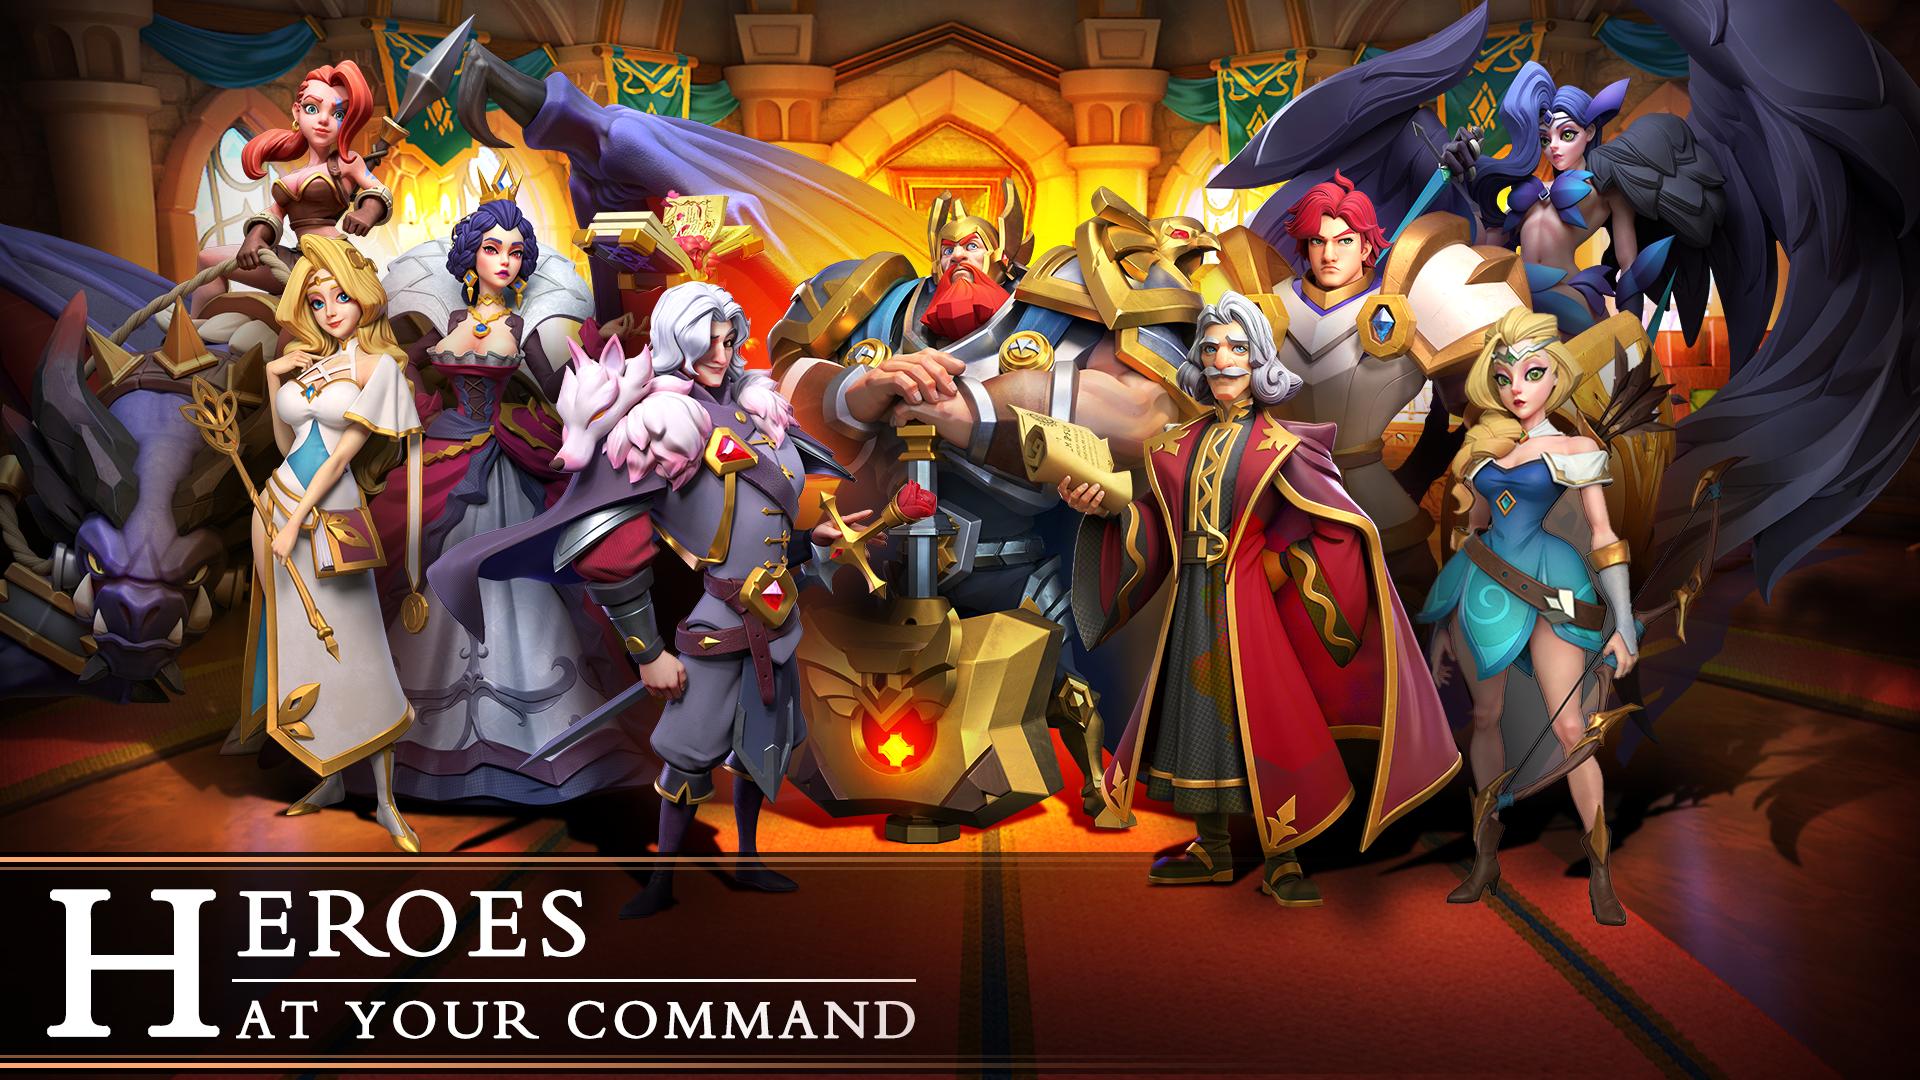 Sia of conquest. Art of Conquest андроид. Epic Conquest. Sea of Conquest на андроид. Sons of Conquest.